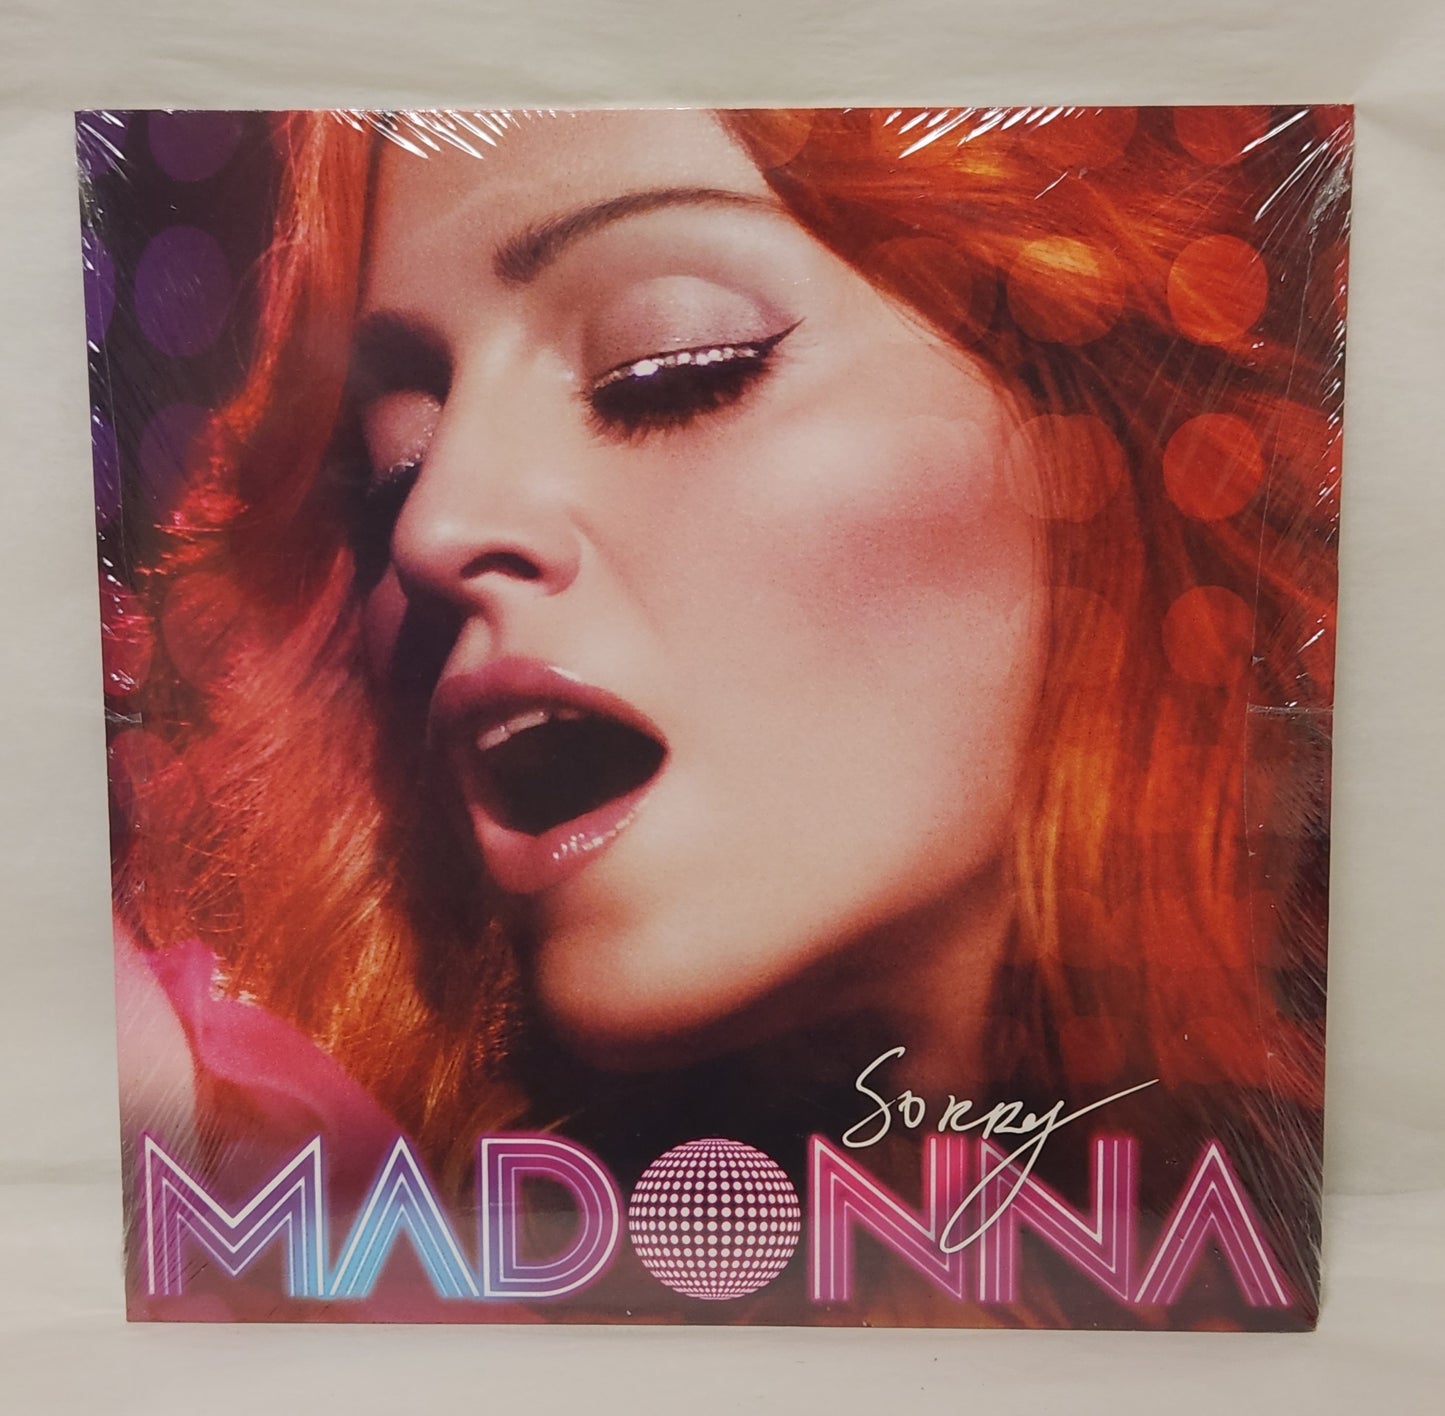 Madonna "Sorry" SEALED 2006 2 LP Electronic Synth Pop Album